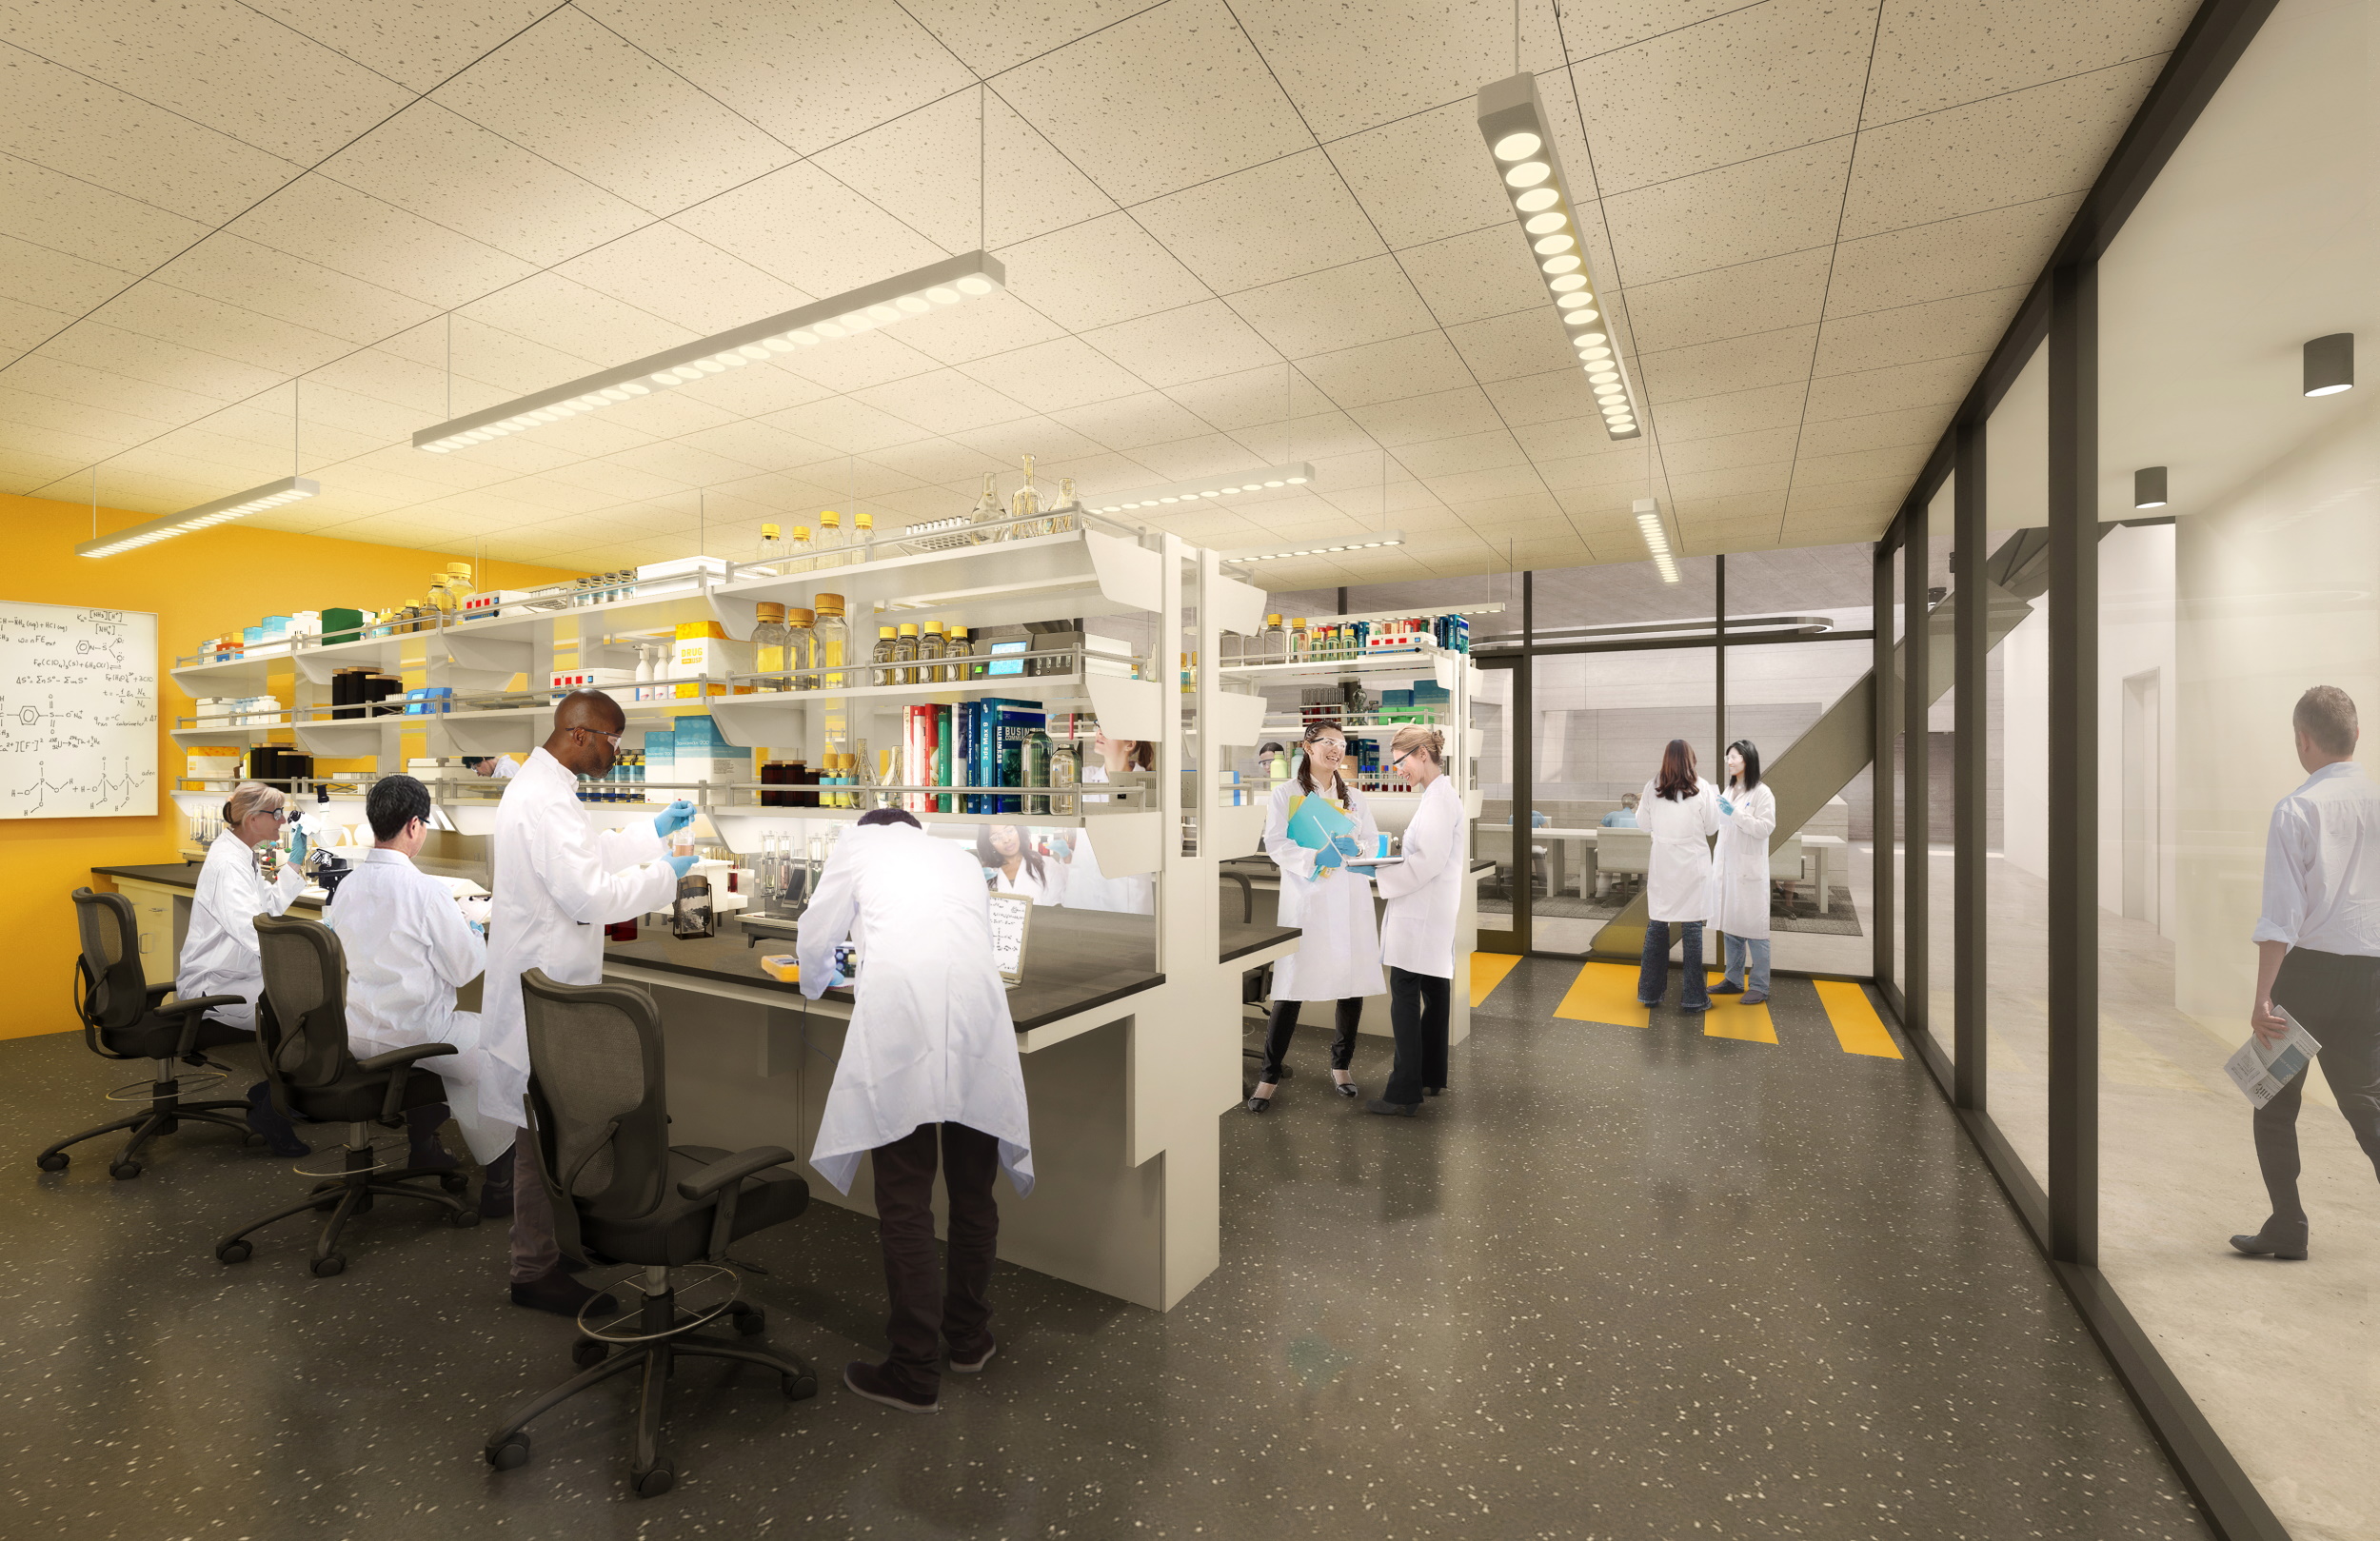 Students in a lab space working in white coats.